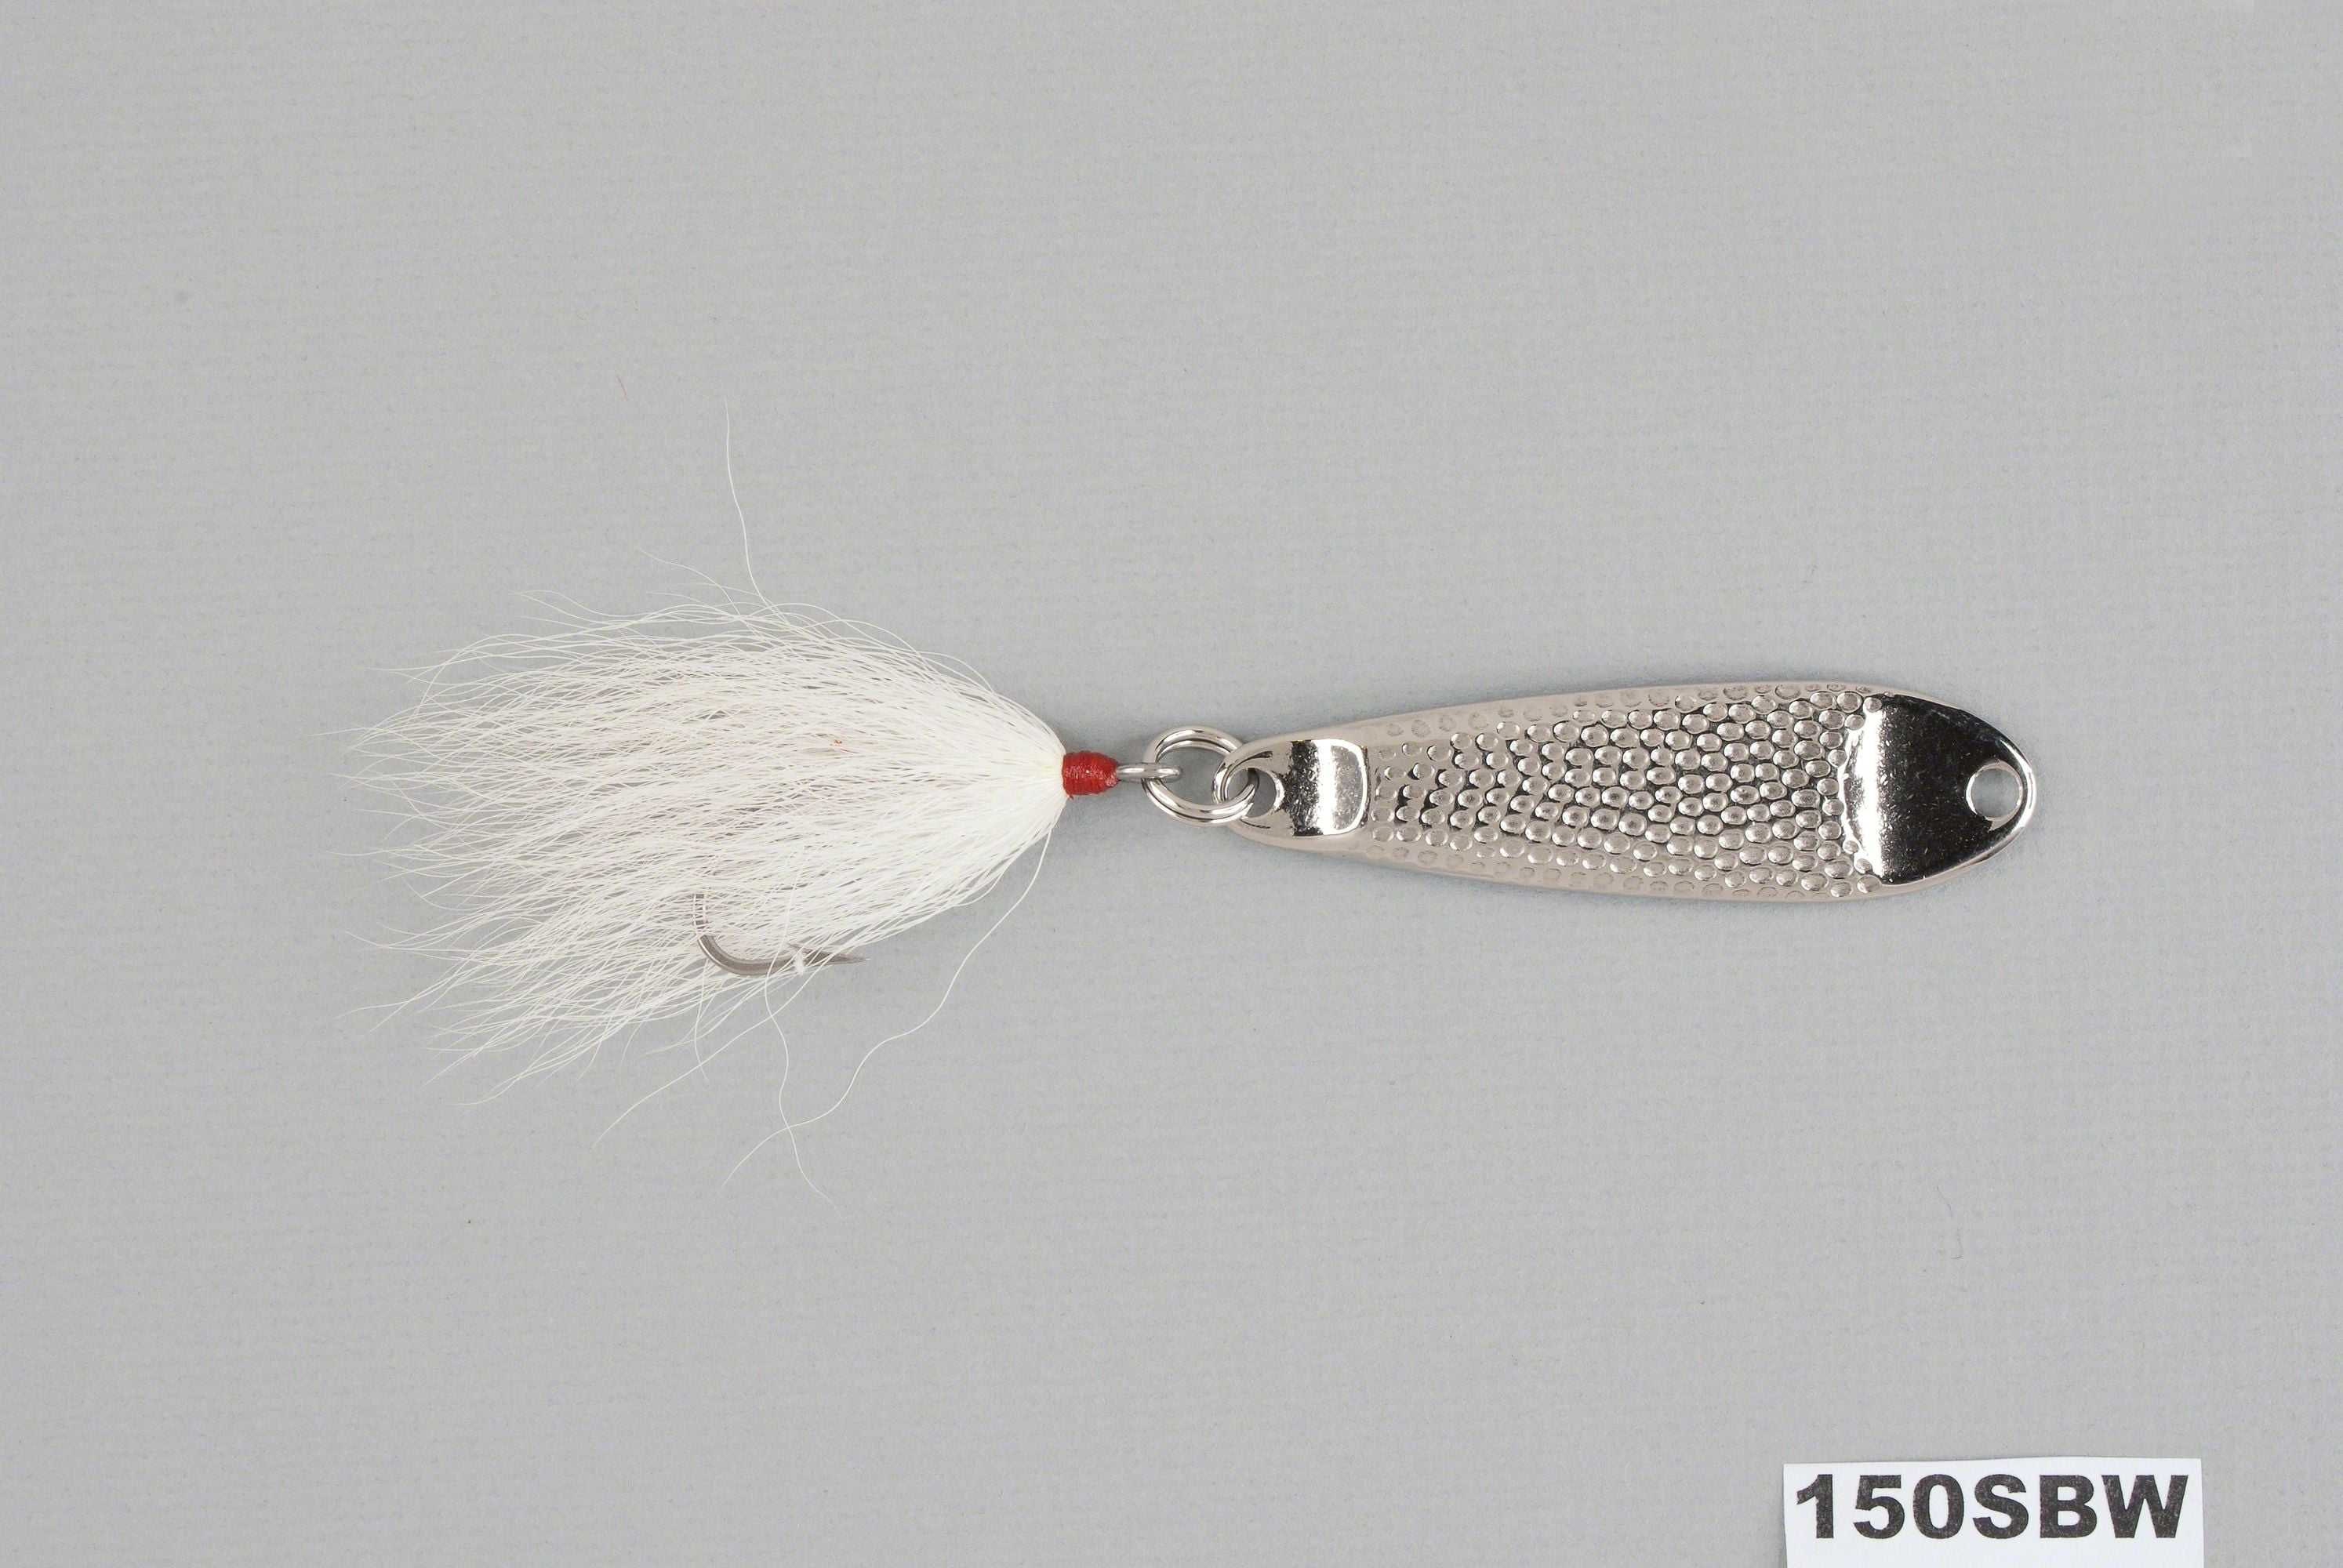 Hopkins 150BW Shorty Hammered Spoon With Bucktail Treble 3 1/2" 1 1/2 oz